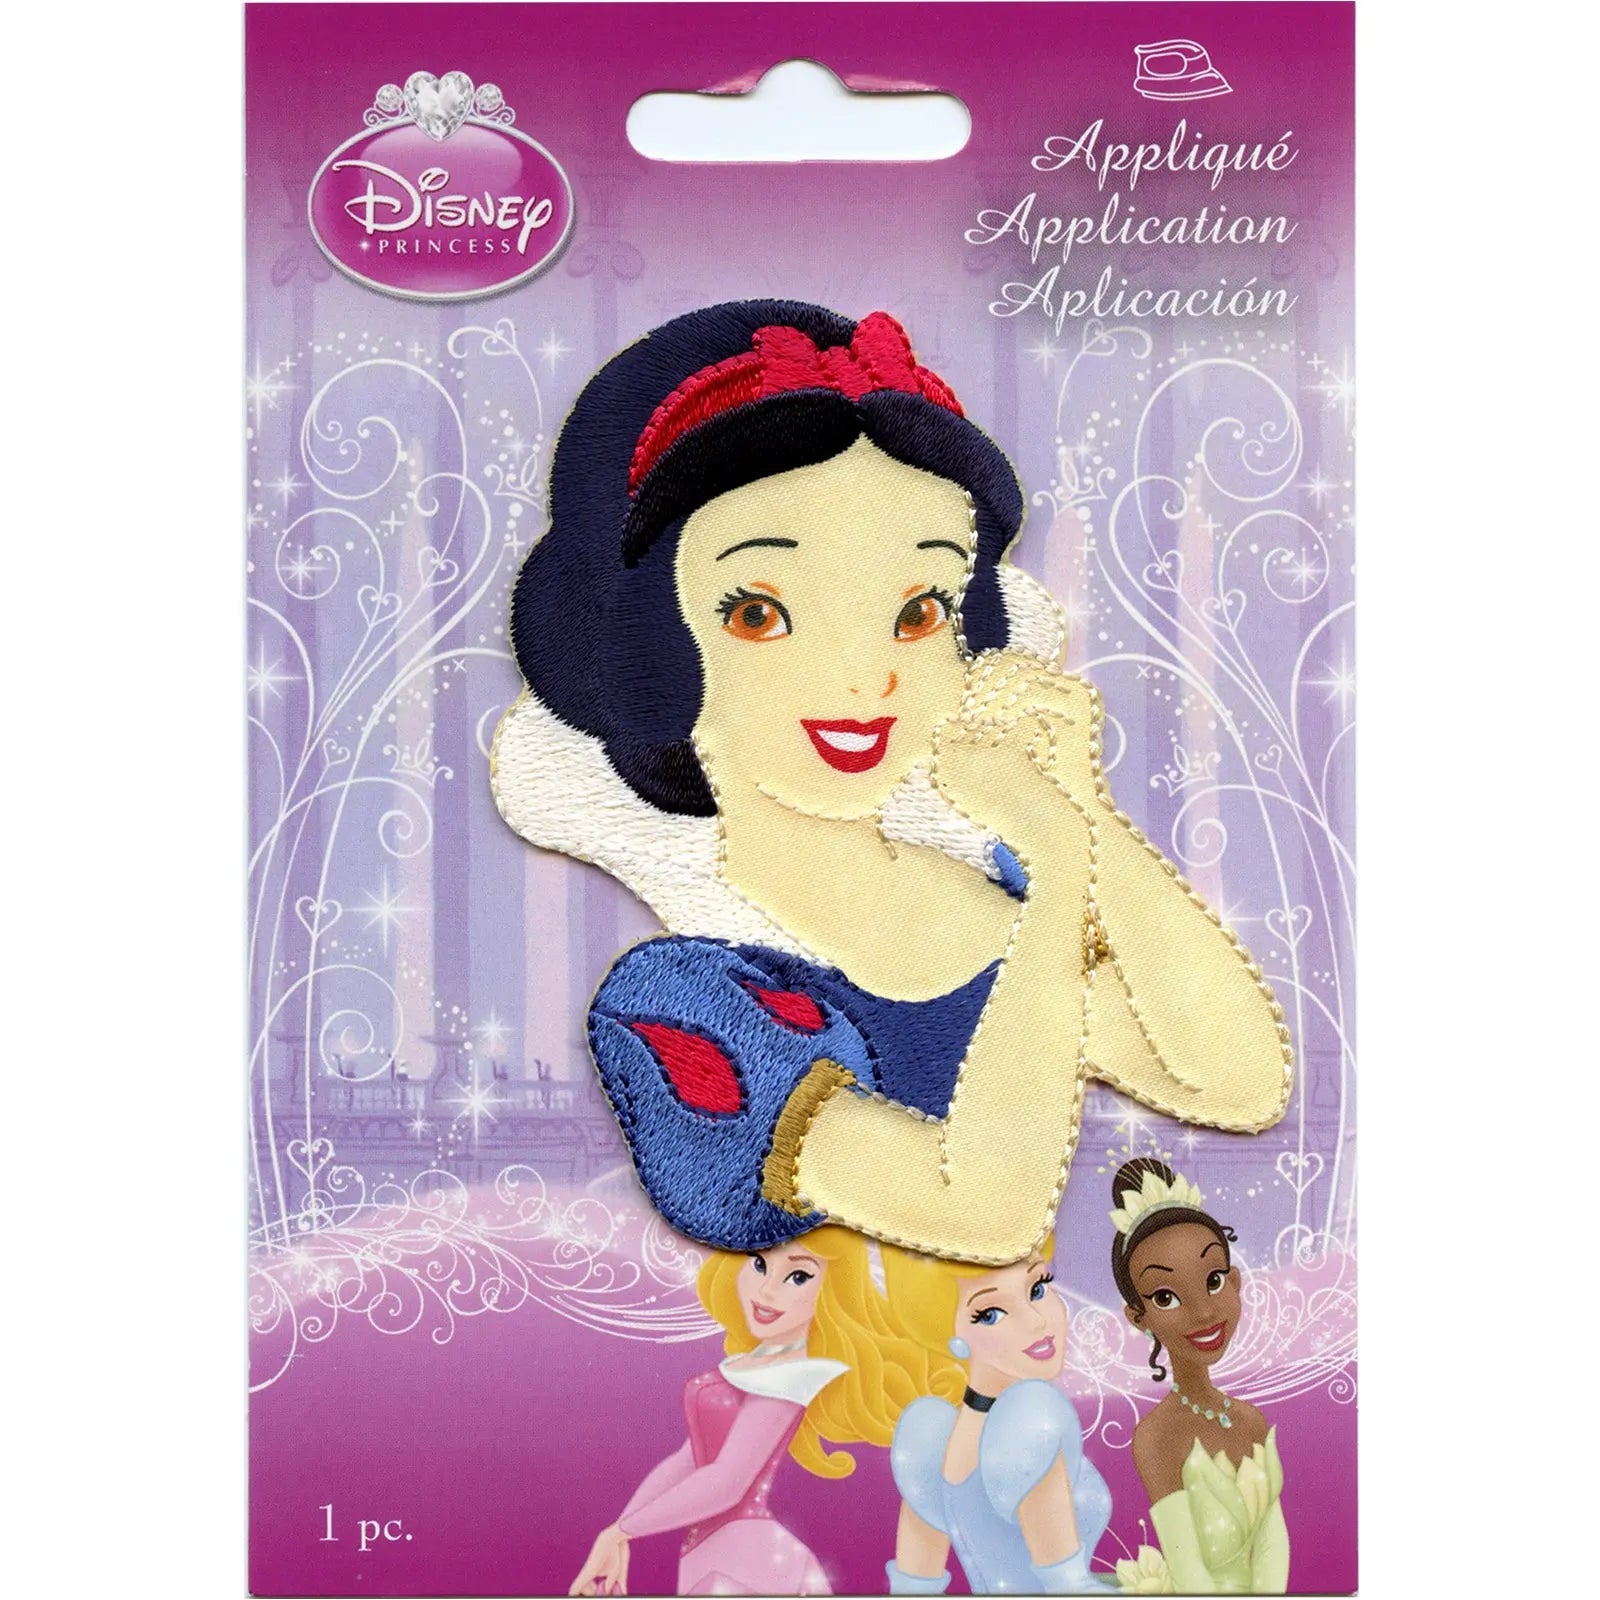 Disney Princess Snow White Portrait Iron on Embroidered Applique Patch - Facing Right 